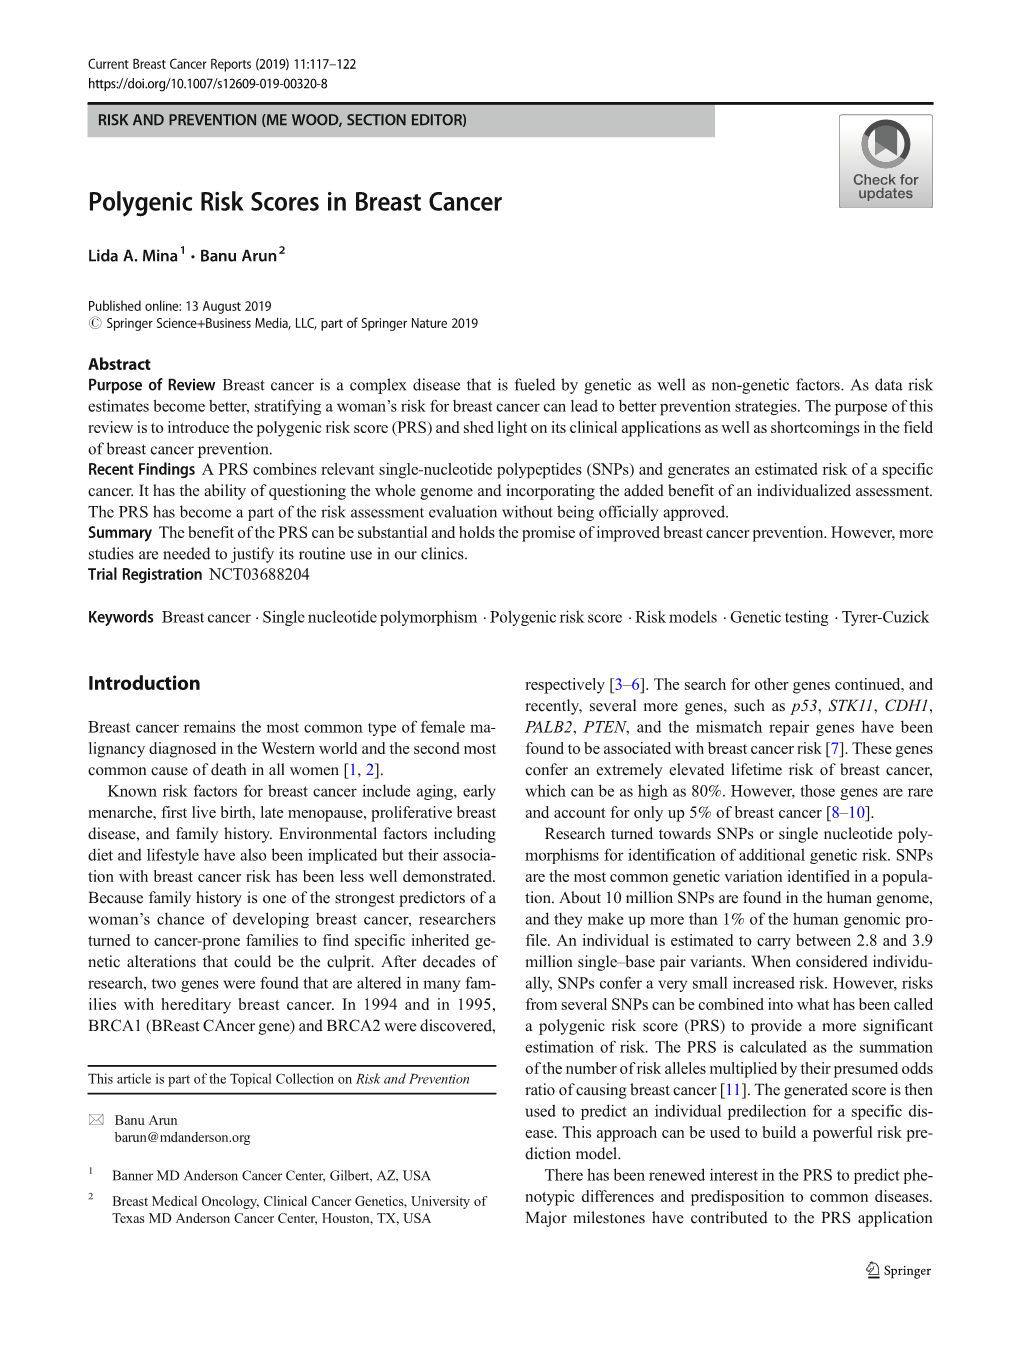 Polygenic Risk Scores in Breast Cancer